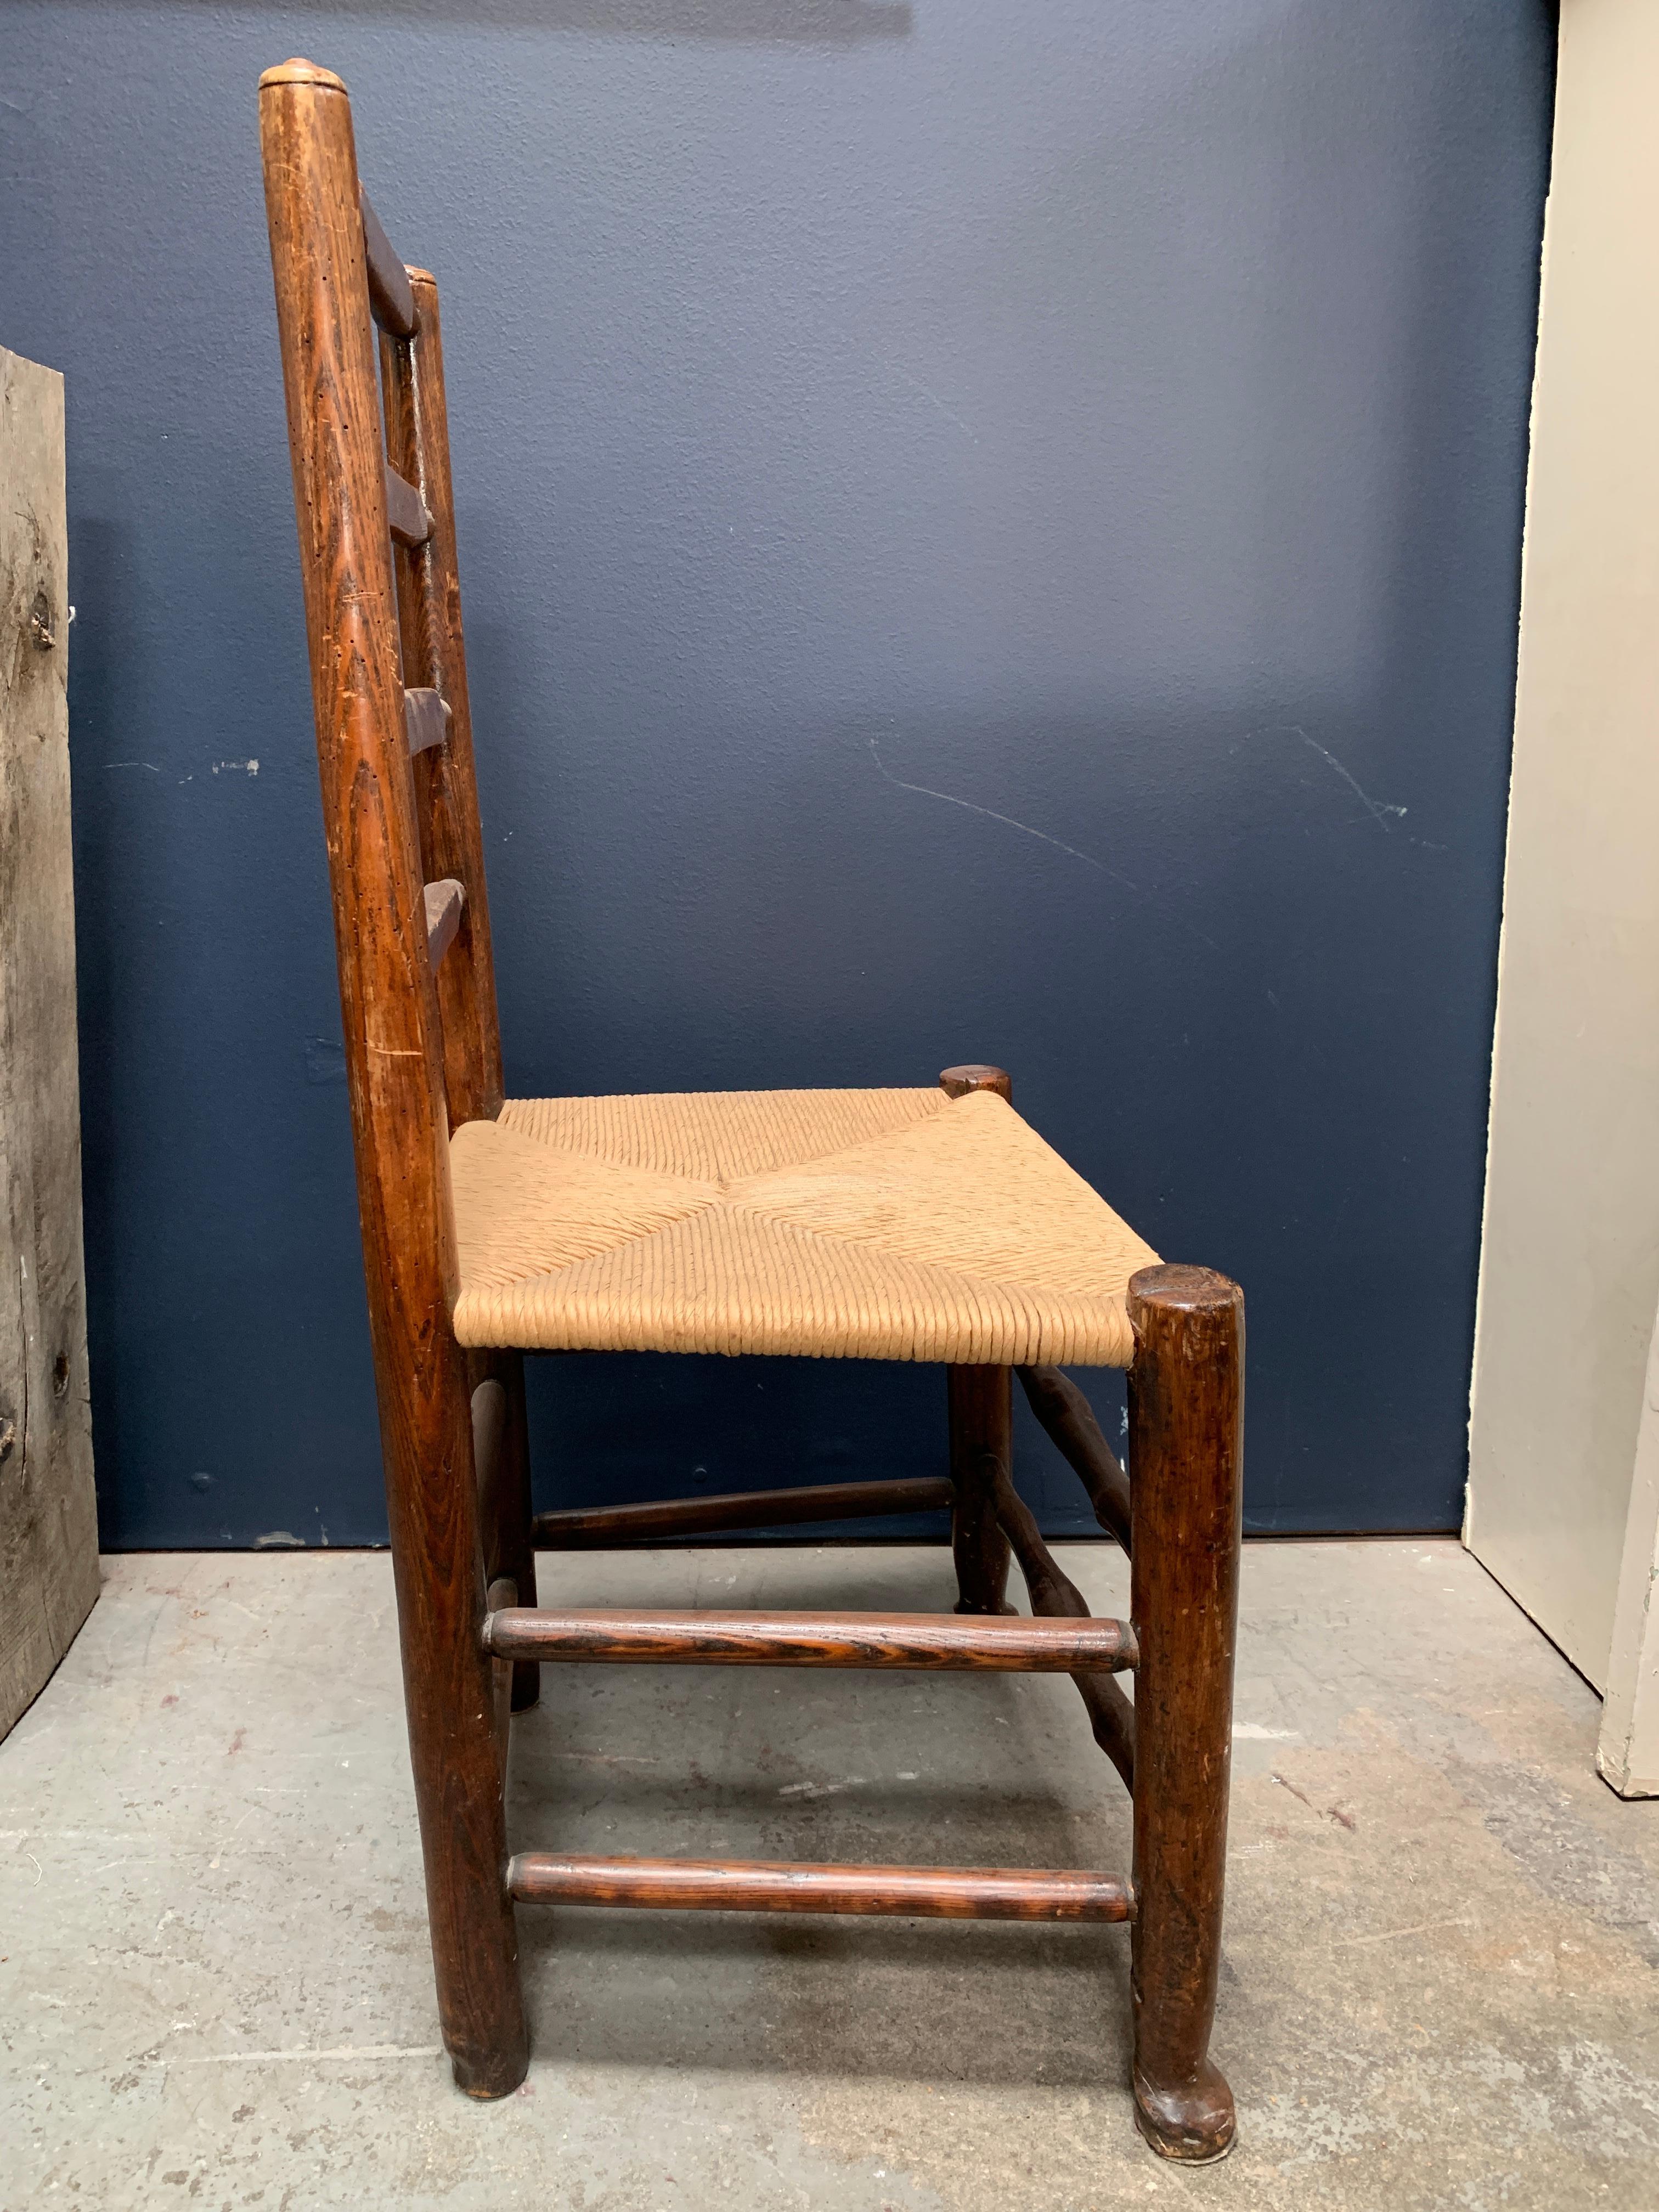 Beautiful vintage standalone chair, can be used as an accent piece for various different styles. The rush seat and ladder back make a perfect pair for a Classic and timeless chair design that is comfortable, functional and one of a kind.